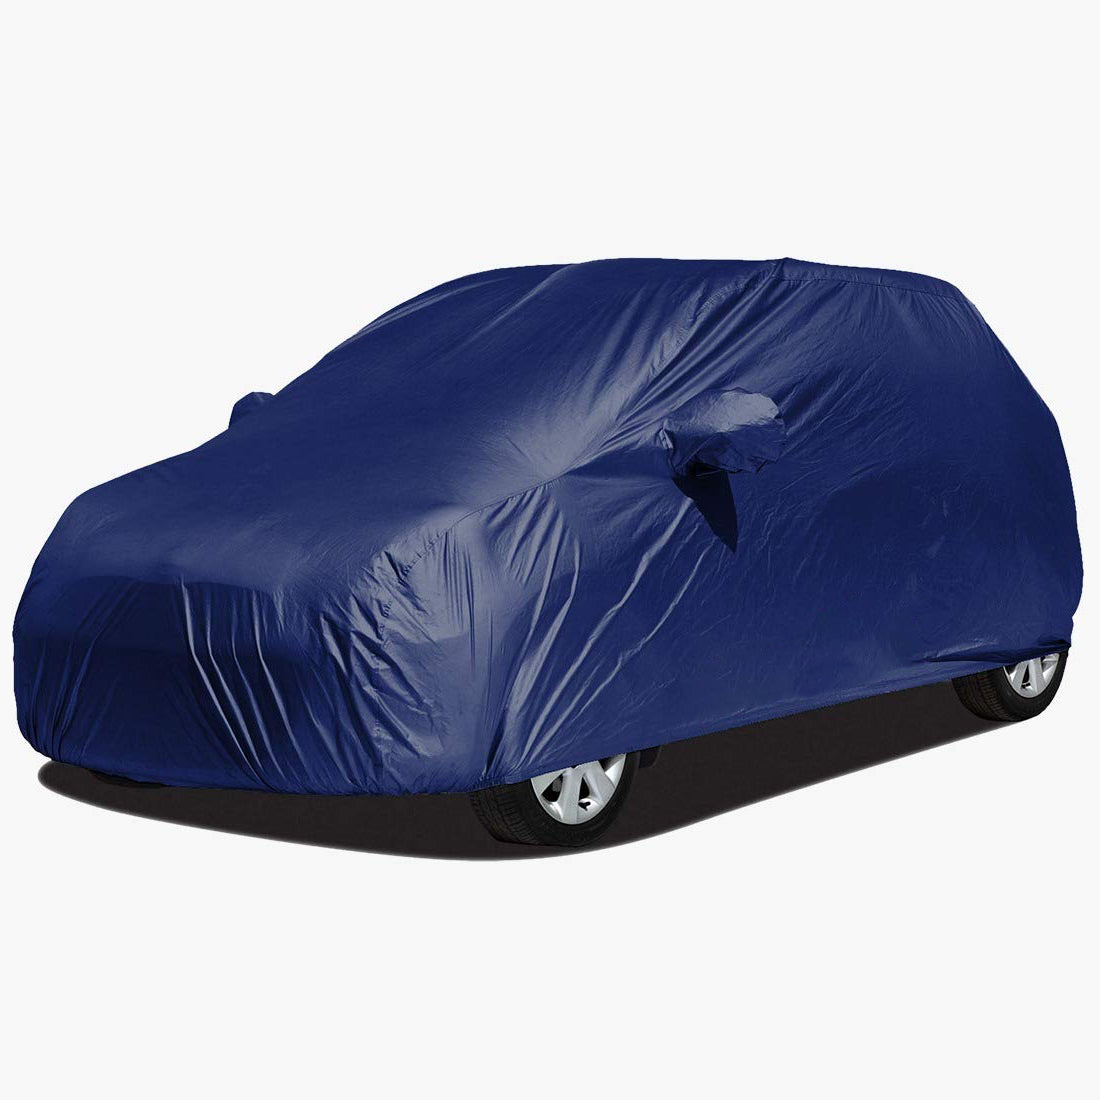 Hyundai i20 (2008â€“2014) Car Body Cover, Heat & Water Resistant, Dustproof without side mirror pockets